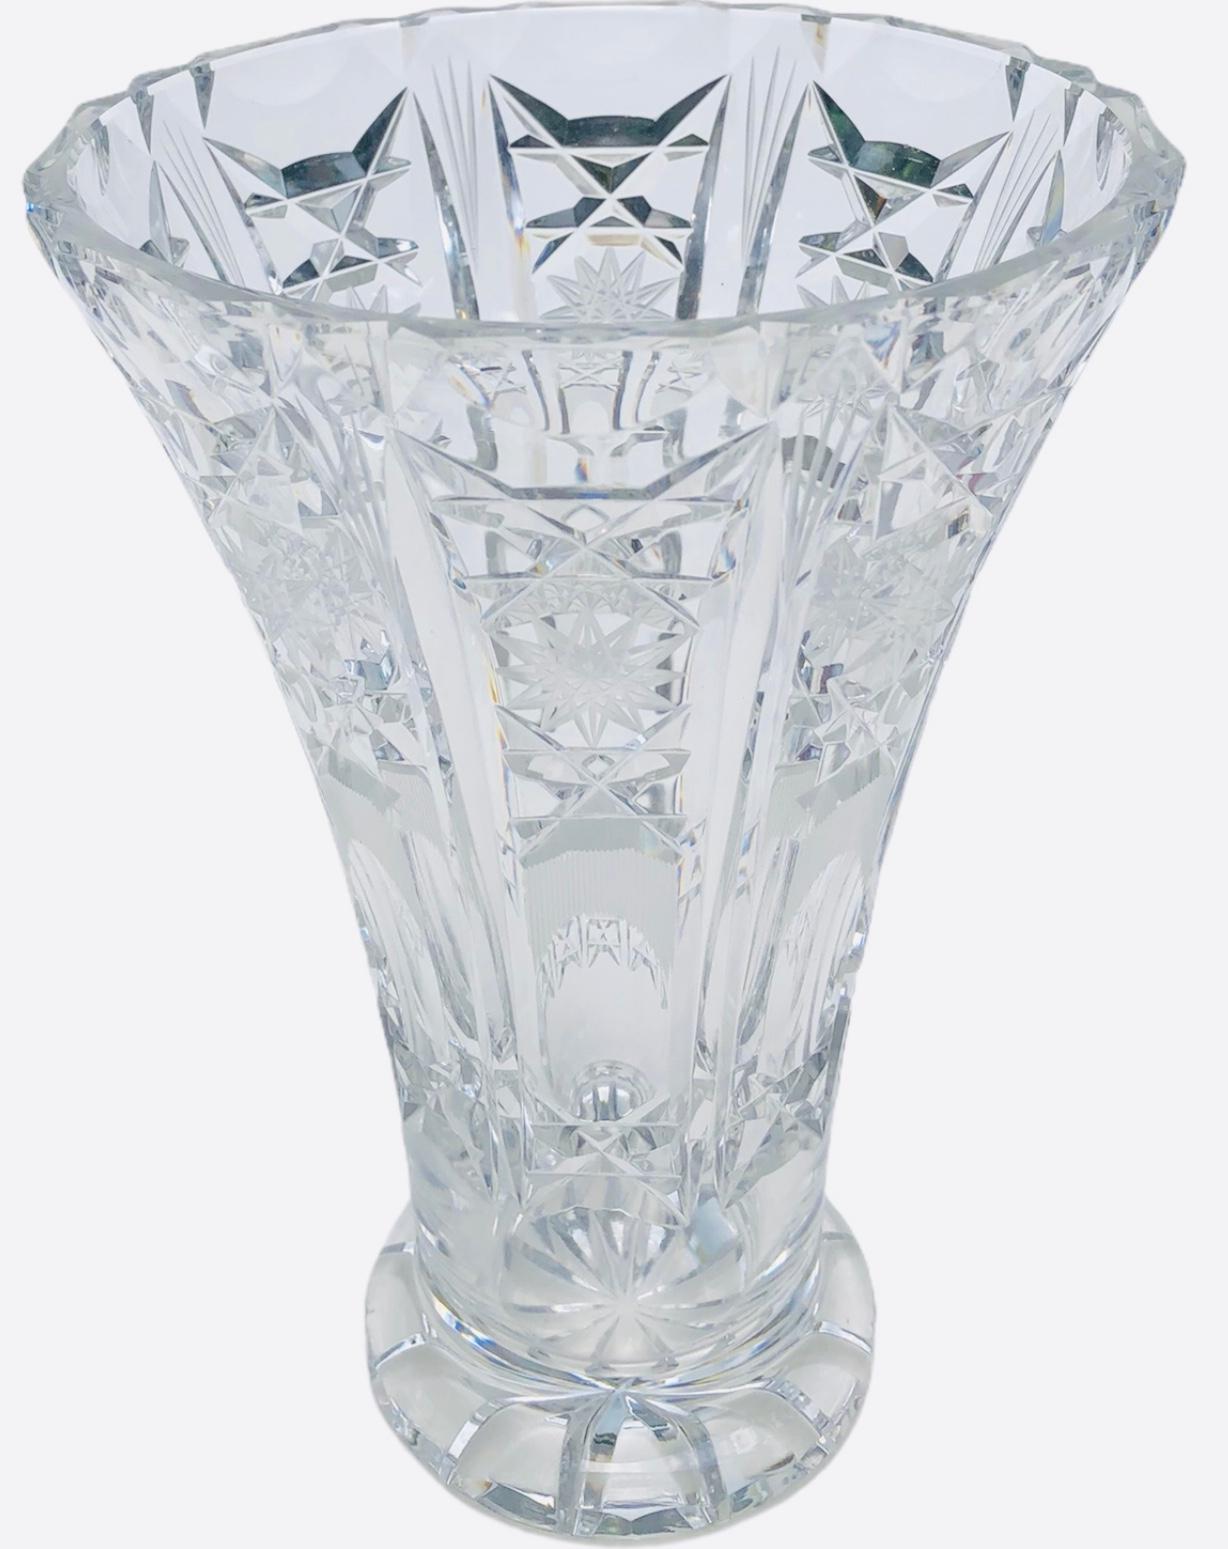 20th Century Pair of French Crystal Vases Attributed to Baccarat